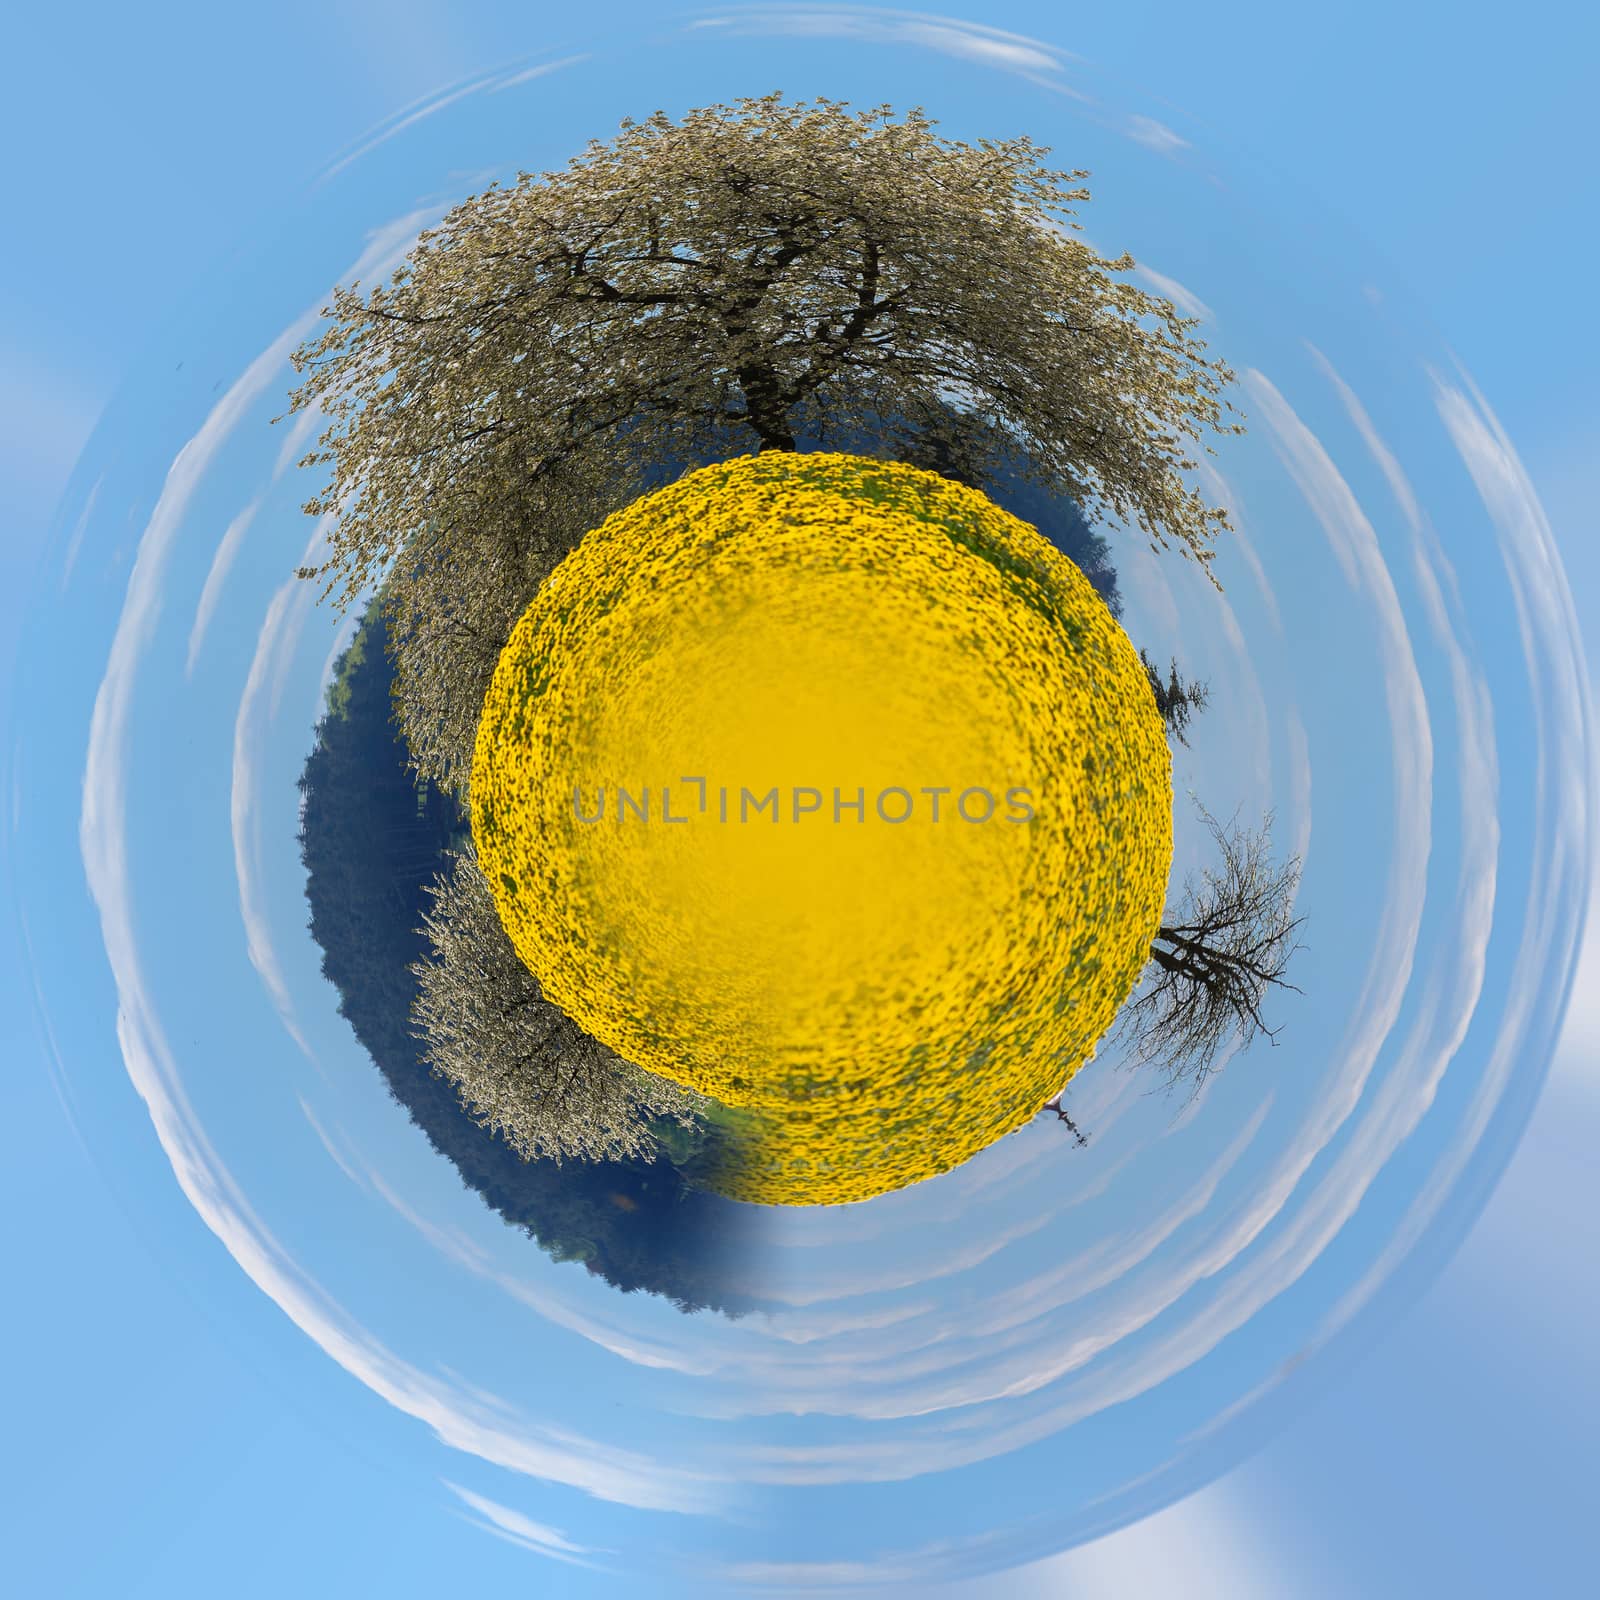 Field of spring flowers dandelions, Yellow dandelion with shallow focus in backgound flowering tree. Beautiful countryside. Beautiful Little planet ecology concept. Tiny green planet